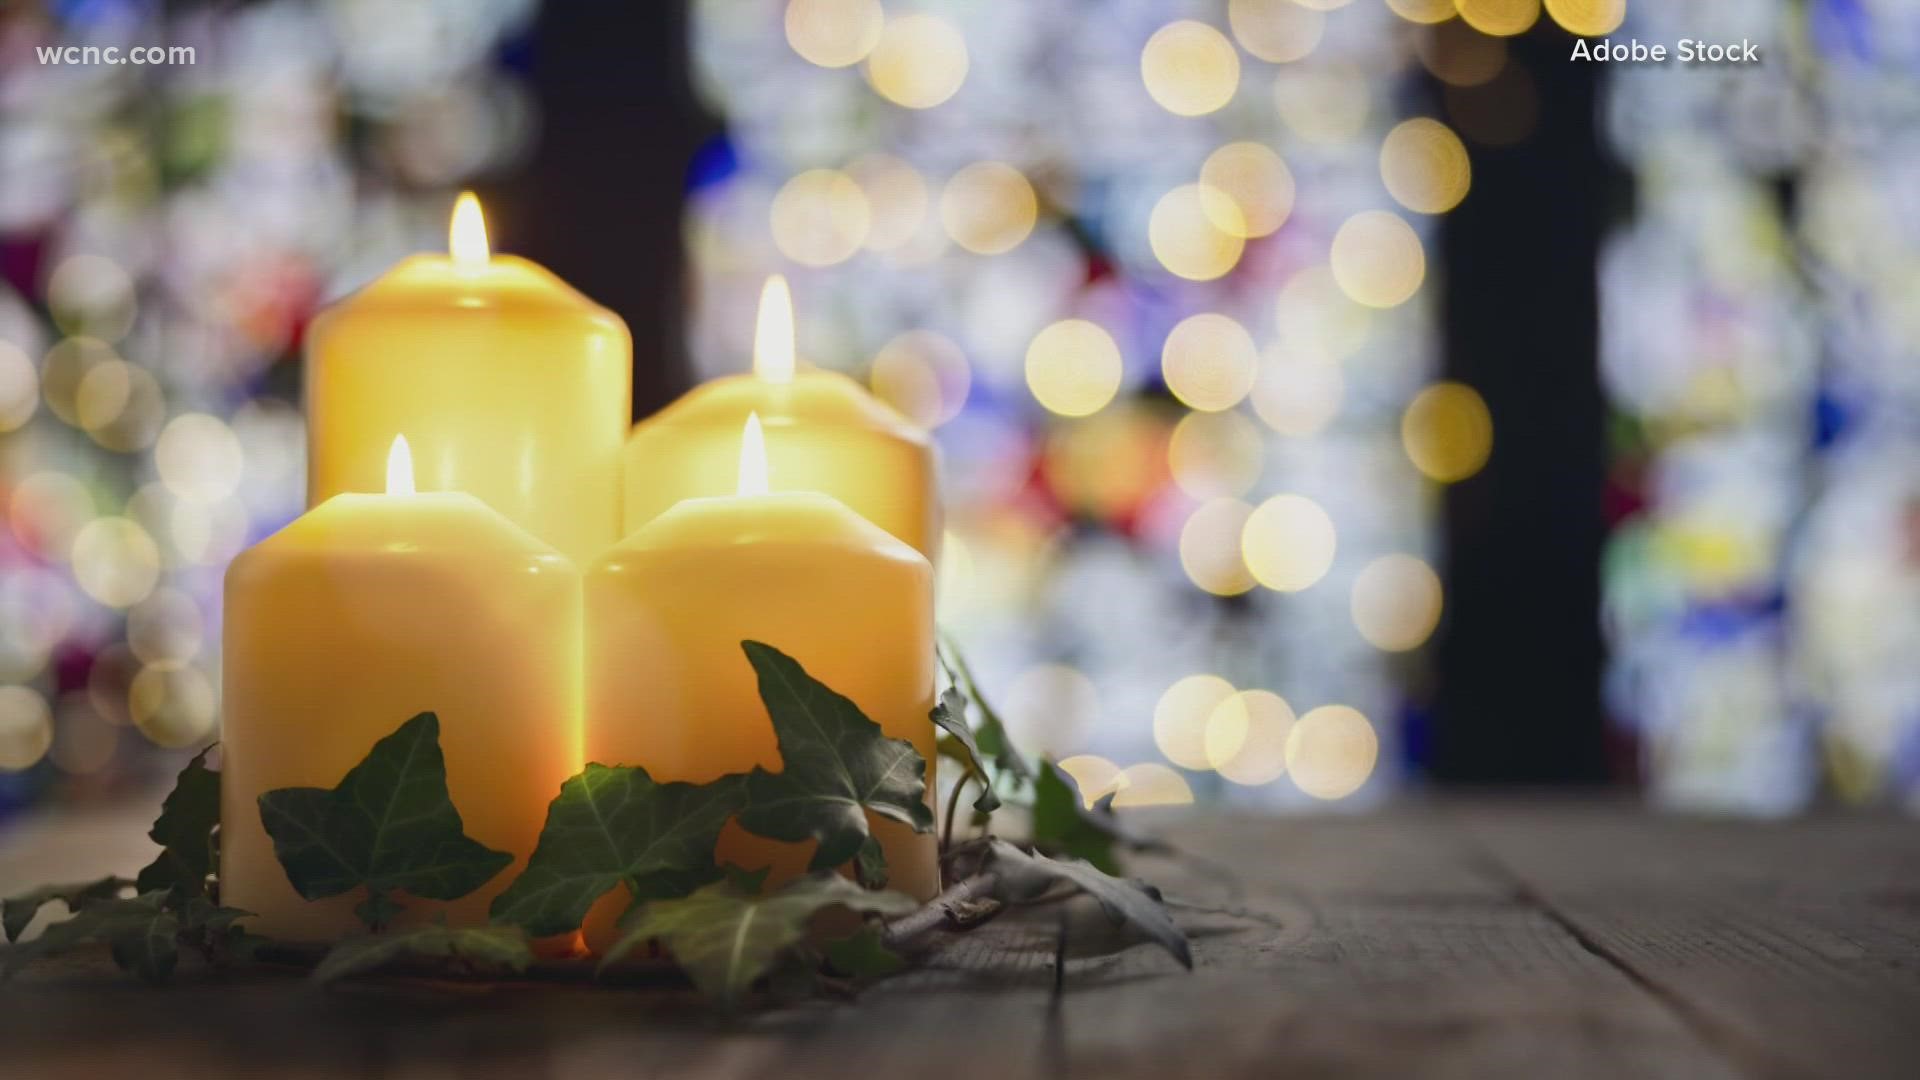 We've heard the holidays referred to as "the most wonderful time of the year," but for those mourning a loss, the holidays can bring grief.